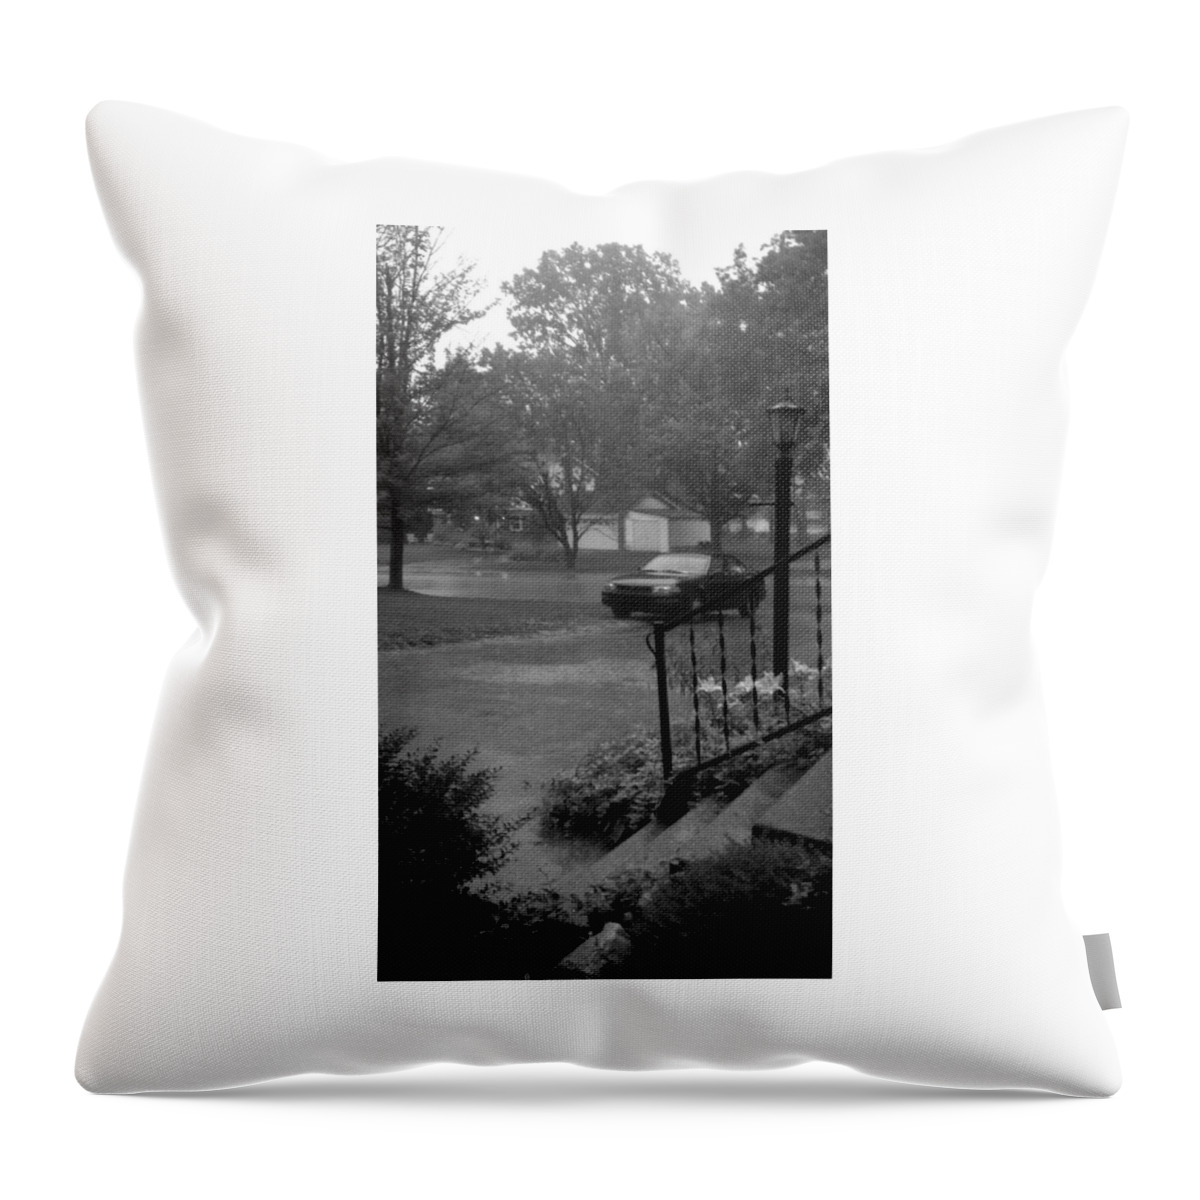 Spring Throw Pillow featuring the photograph Rainy Day of Spring by Risa Kawaguchi Law